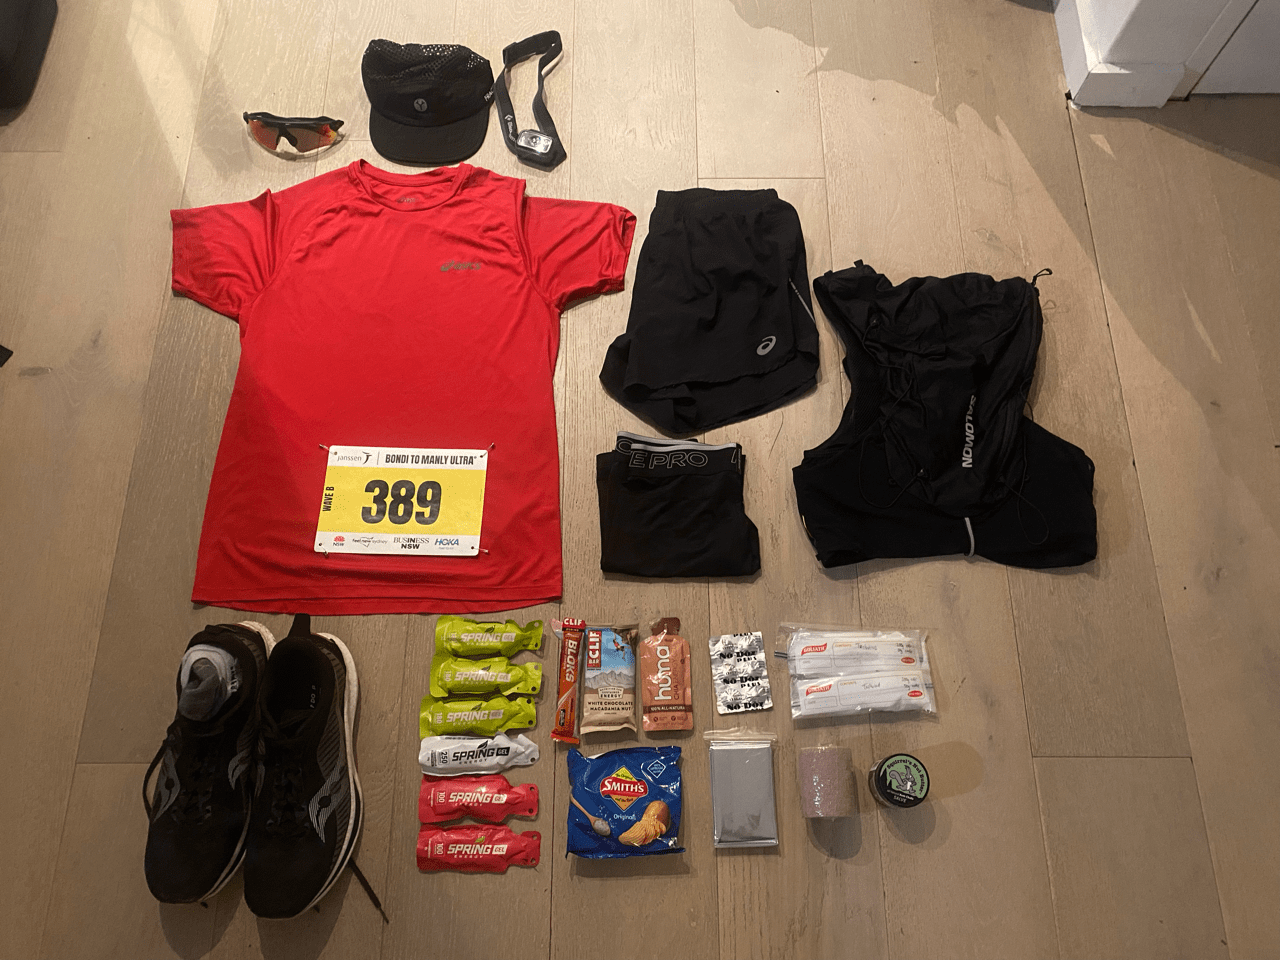 Flat lay of running gear used in the ultra race